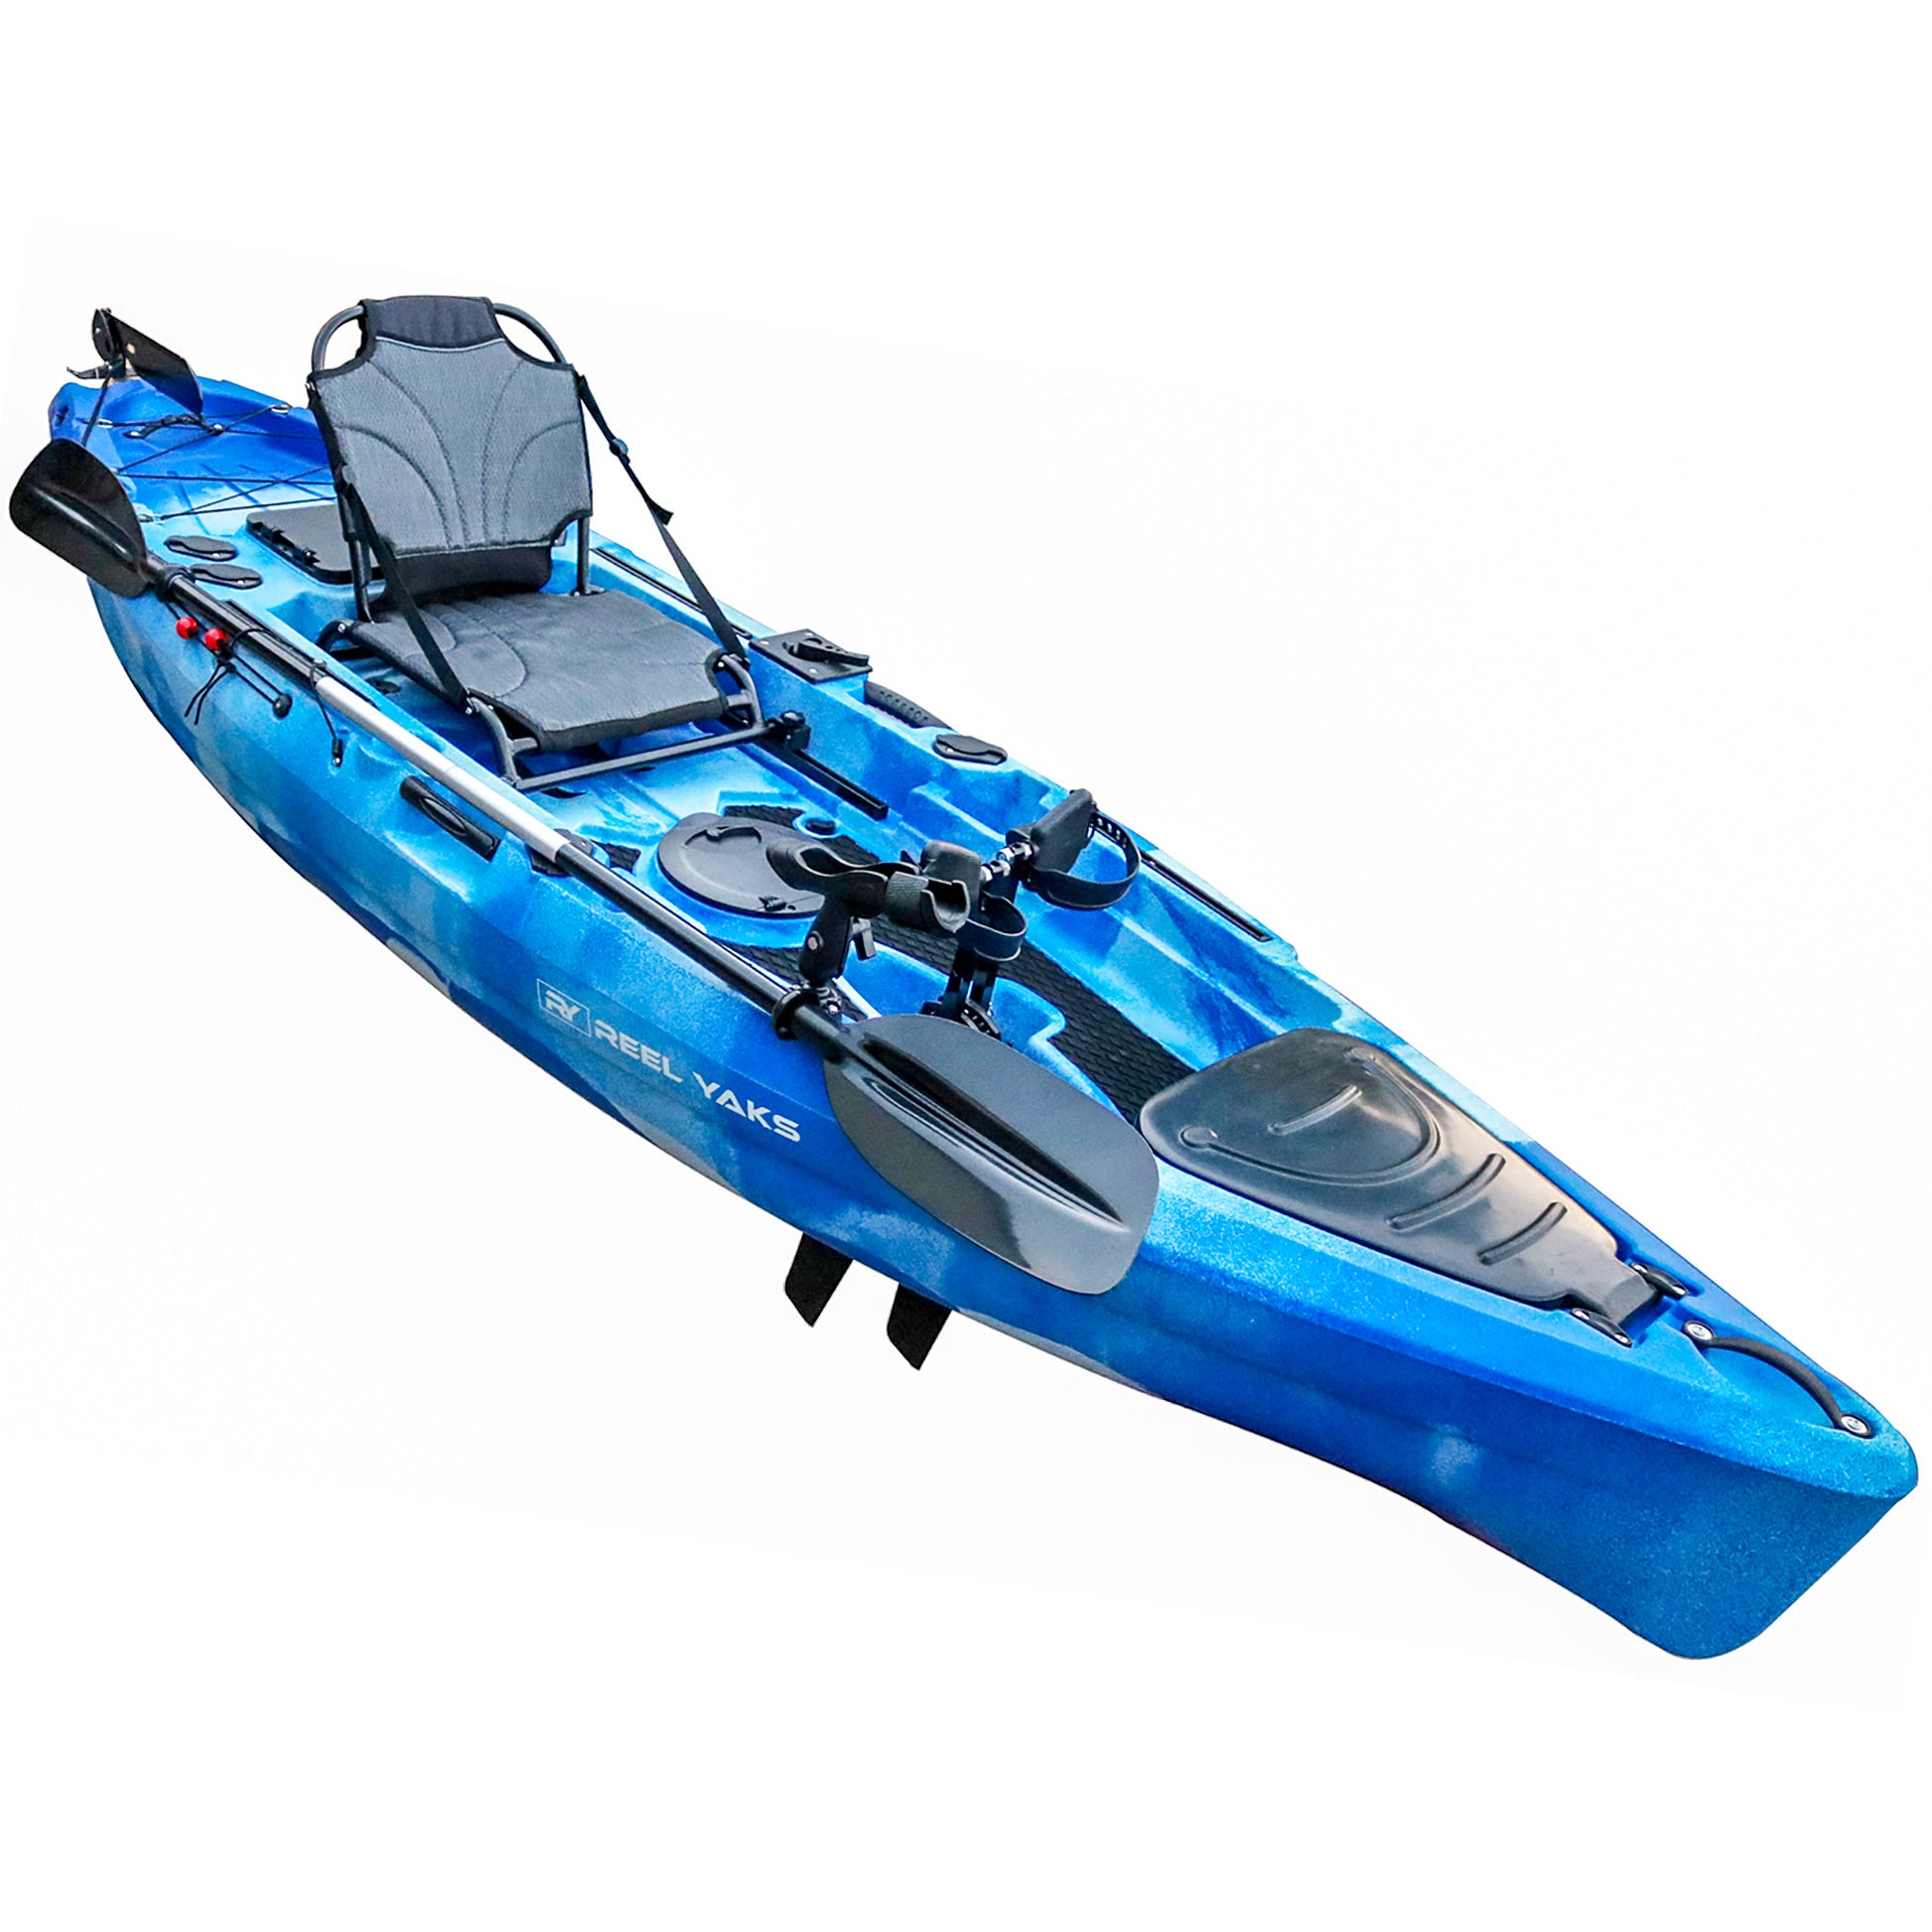 Reel Yaks Pedal Kayak Fishing Angler 11’ | Sit On Top or Stand | 500lbs Capacity for Adult Youths Kids| Suitable for Ocean Lakes Rivers | Foot O